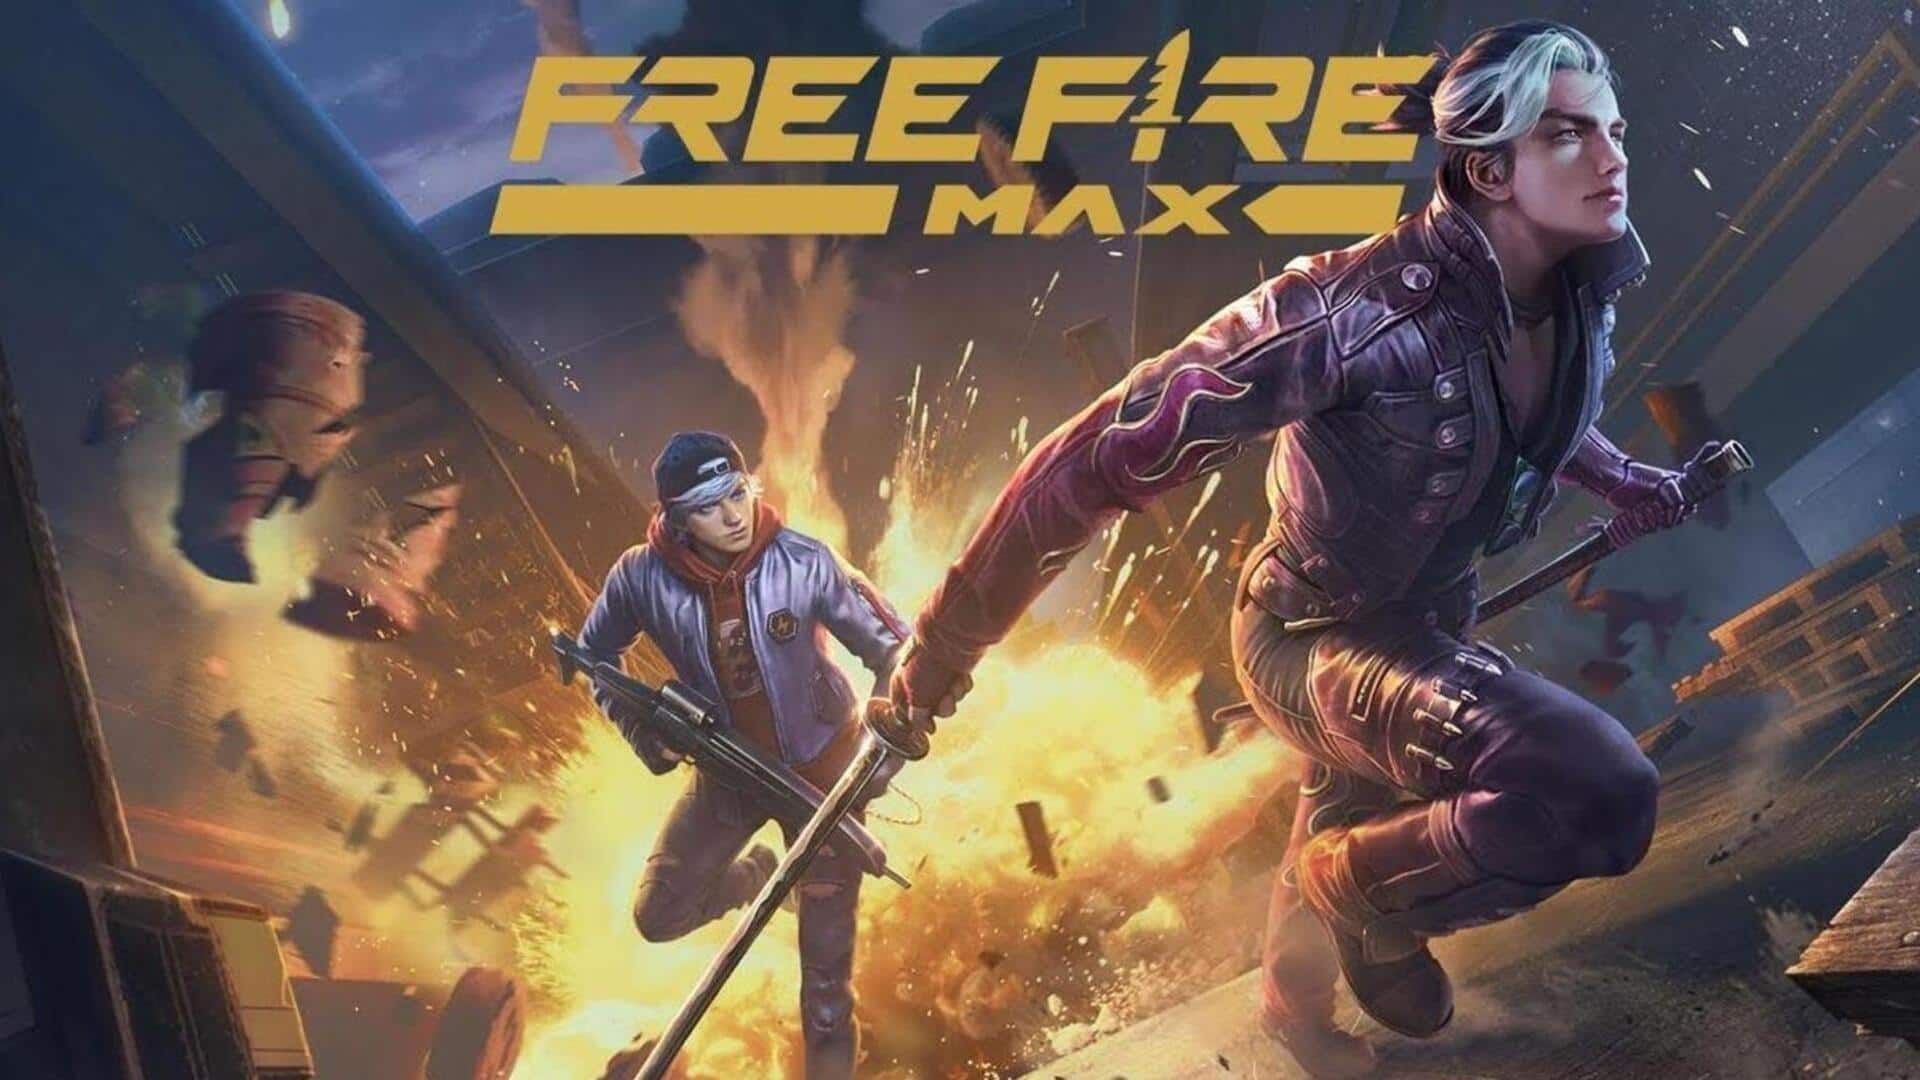 Garena Free Fire MAX codes for December 10: Redeem now